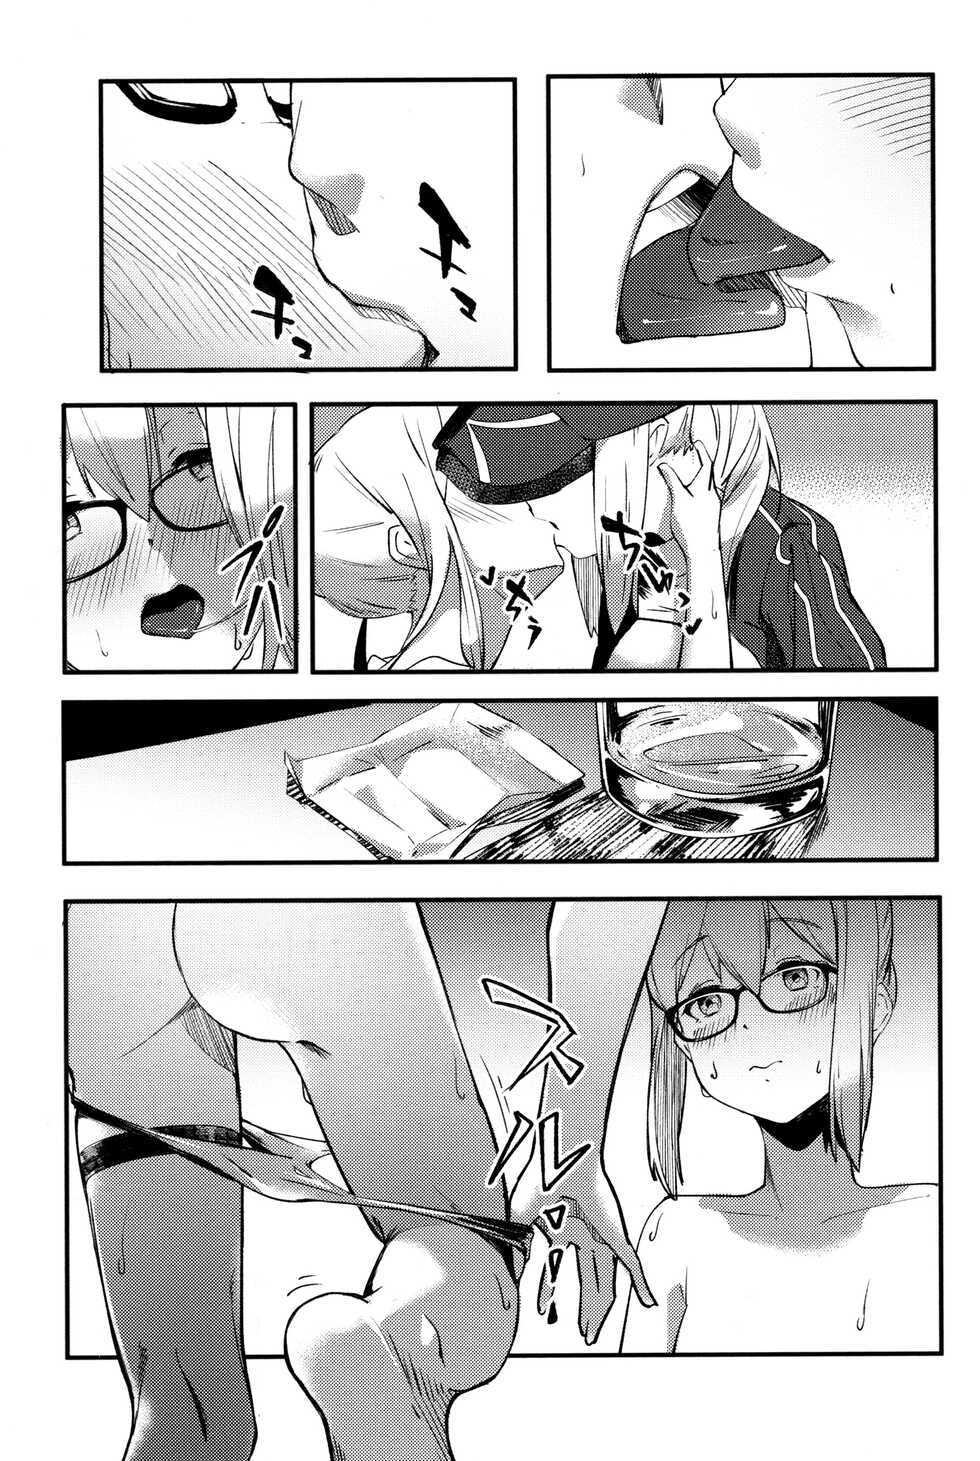 (C97) [picapica Suppa (Suppa)] kiss the future (Fate/Grand Order) [English] [No.1 Idle Translations] - Page 18